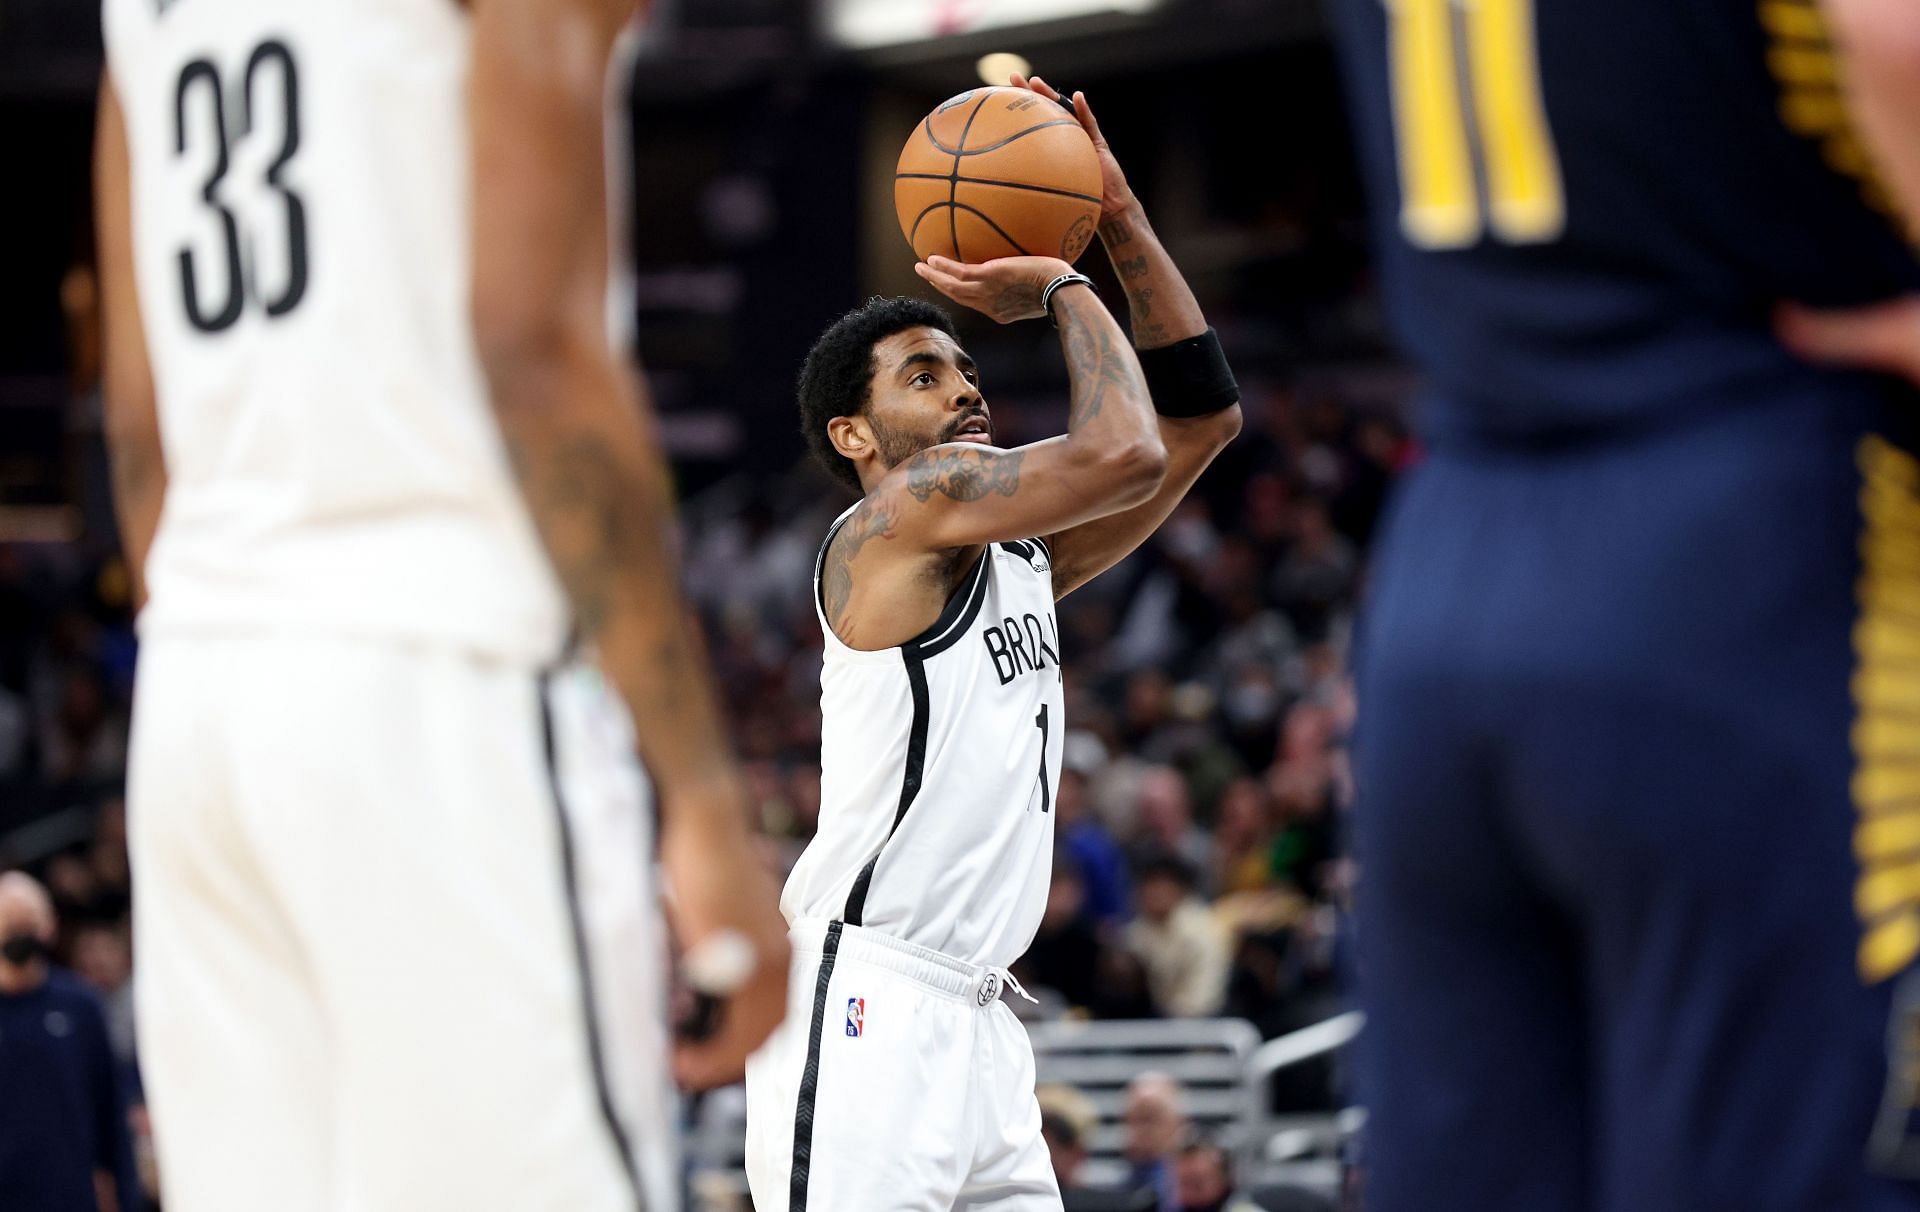 Kyrie Irving #11 of the Brooklyn Nets shoots the ball